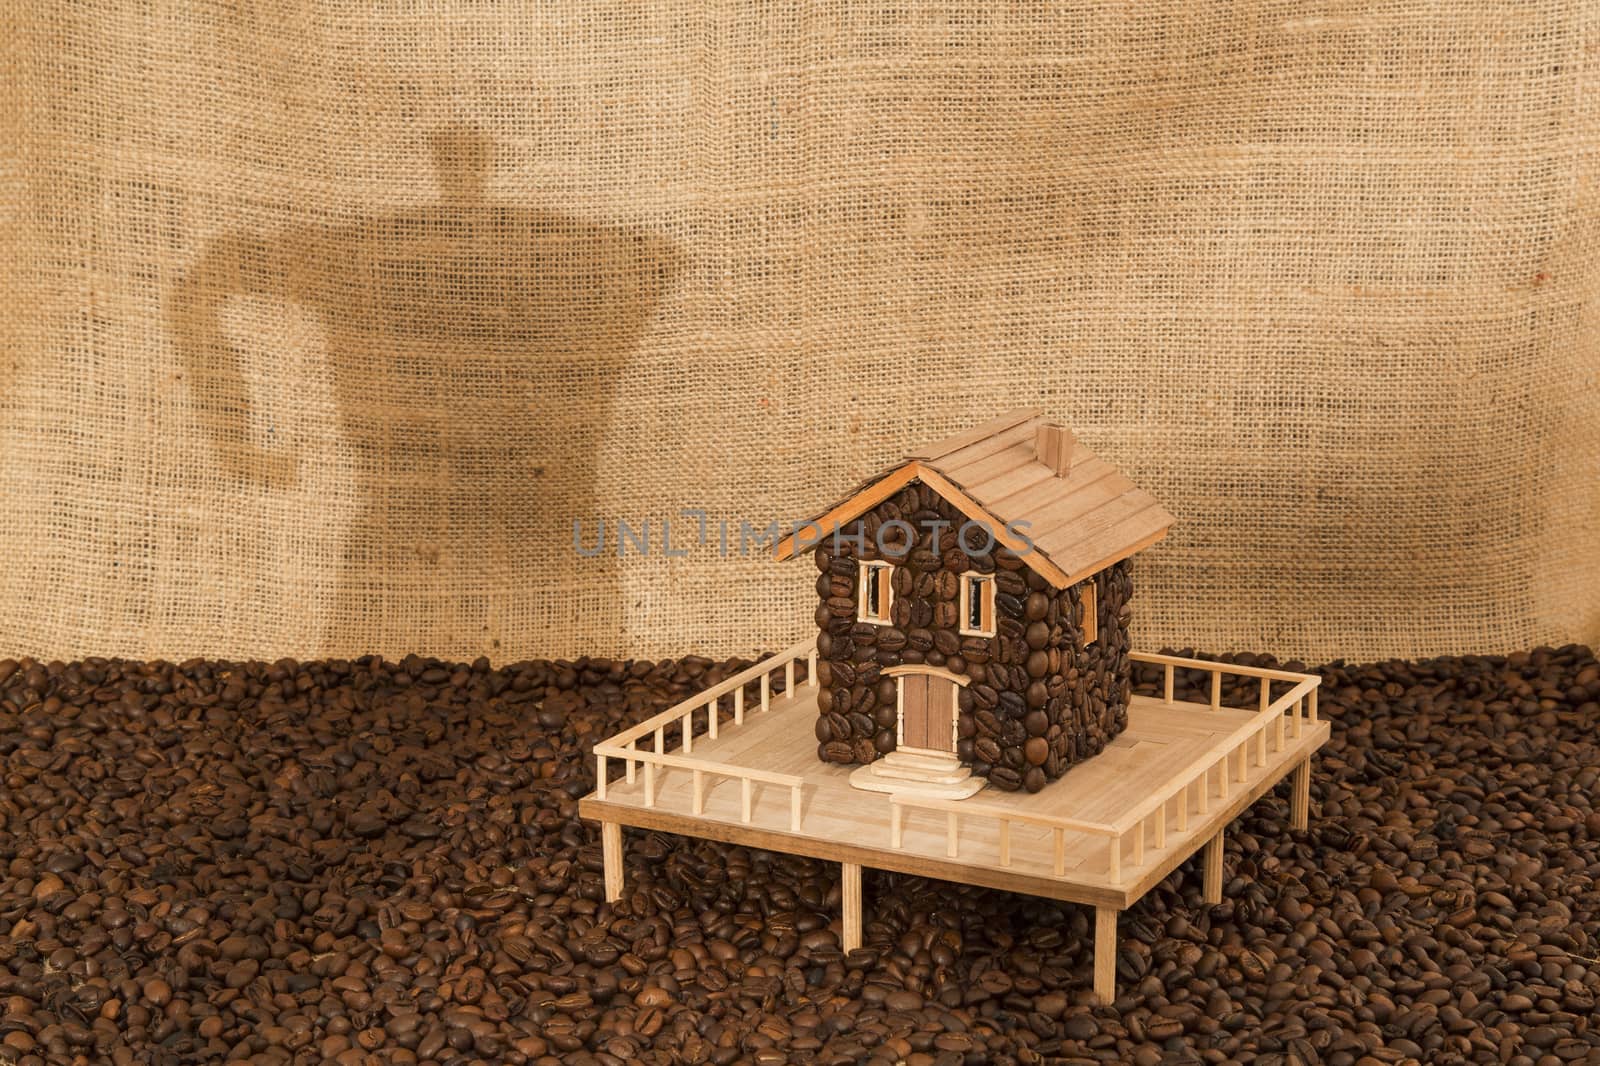 House made of coffee on sea of coffee and background screening shadow of a coffee machine